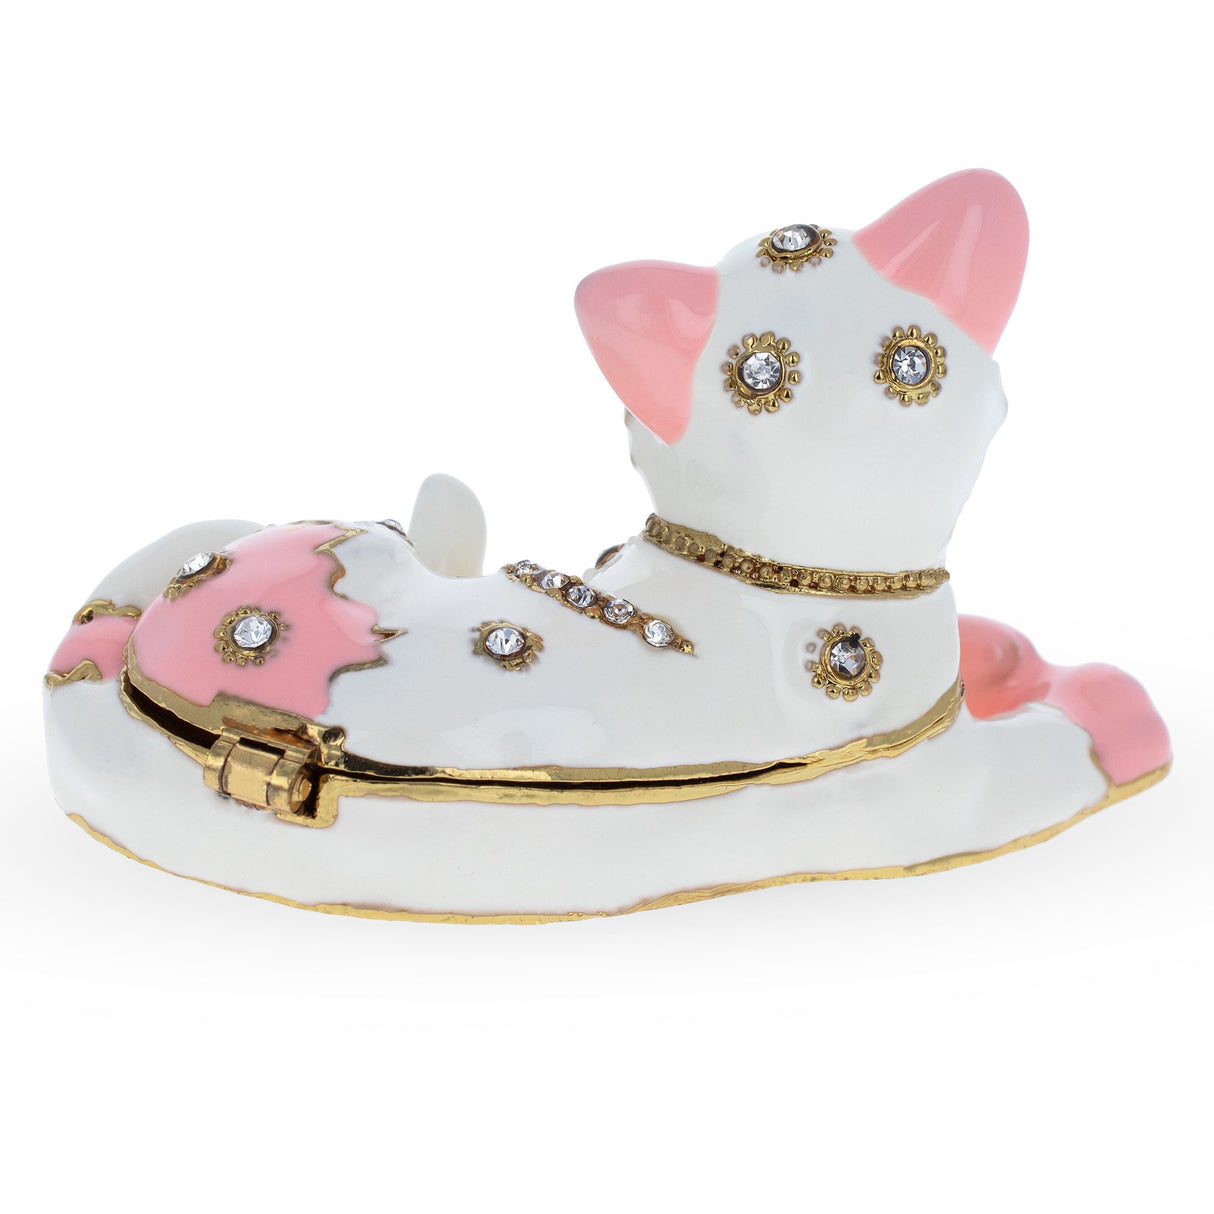 Pink and White Cat Jeweled Trinket Box Figurine ,dimensions in inches: 1.8 x  x 2.75